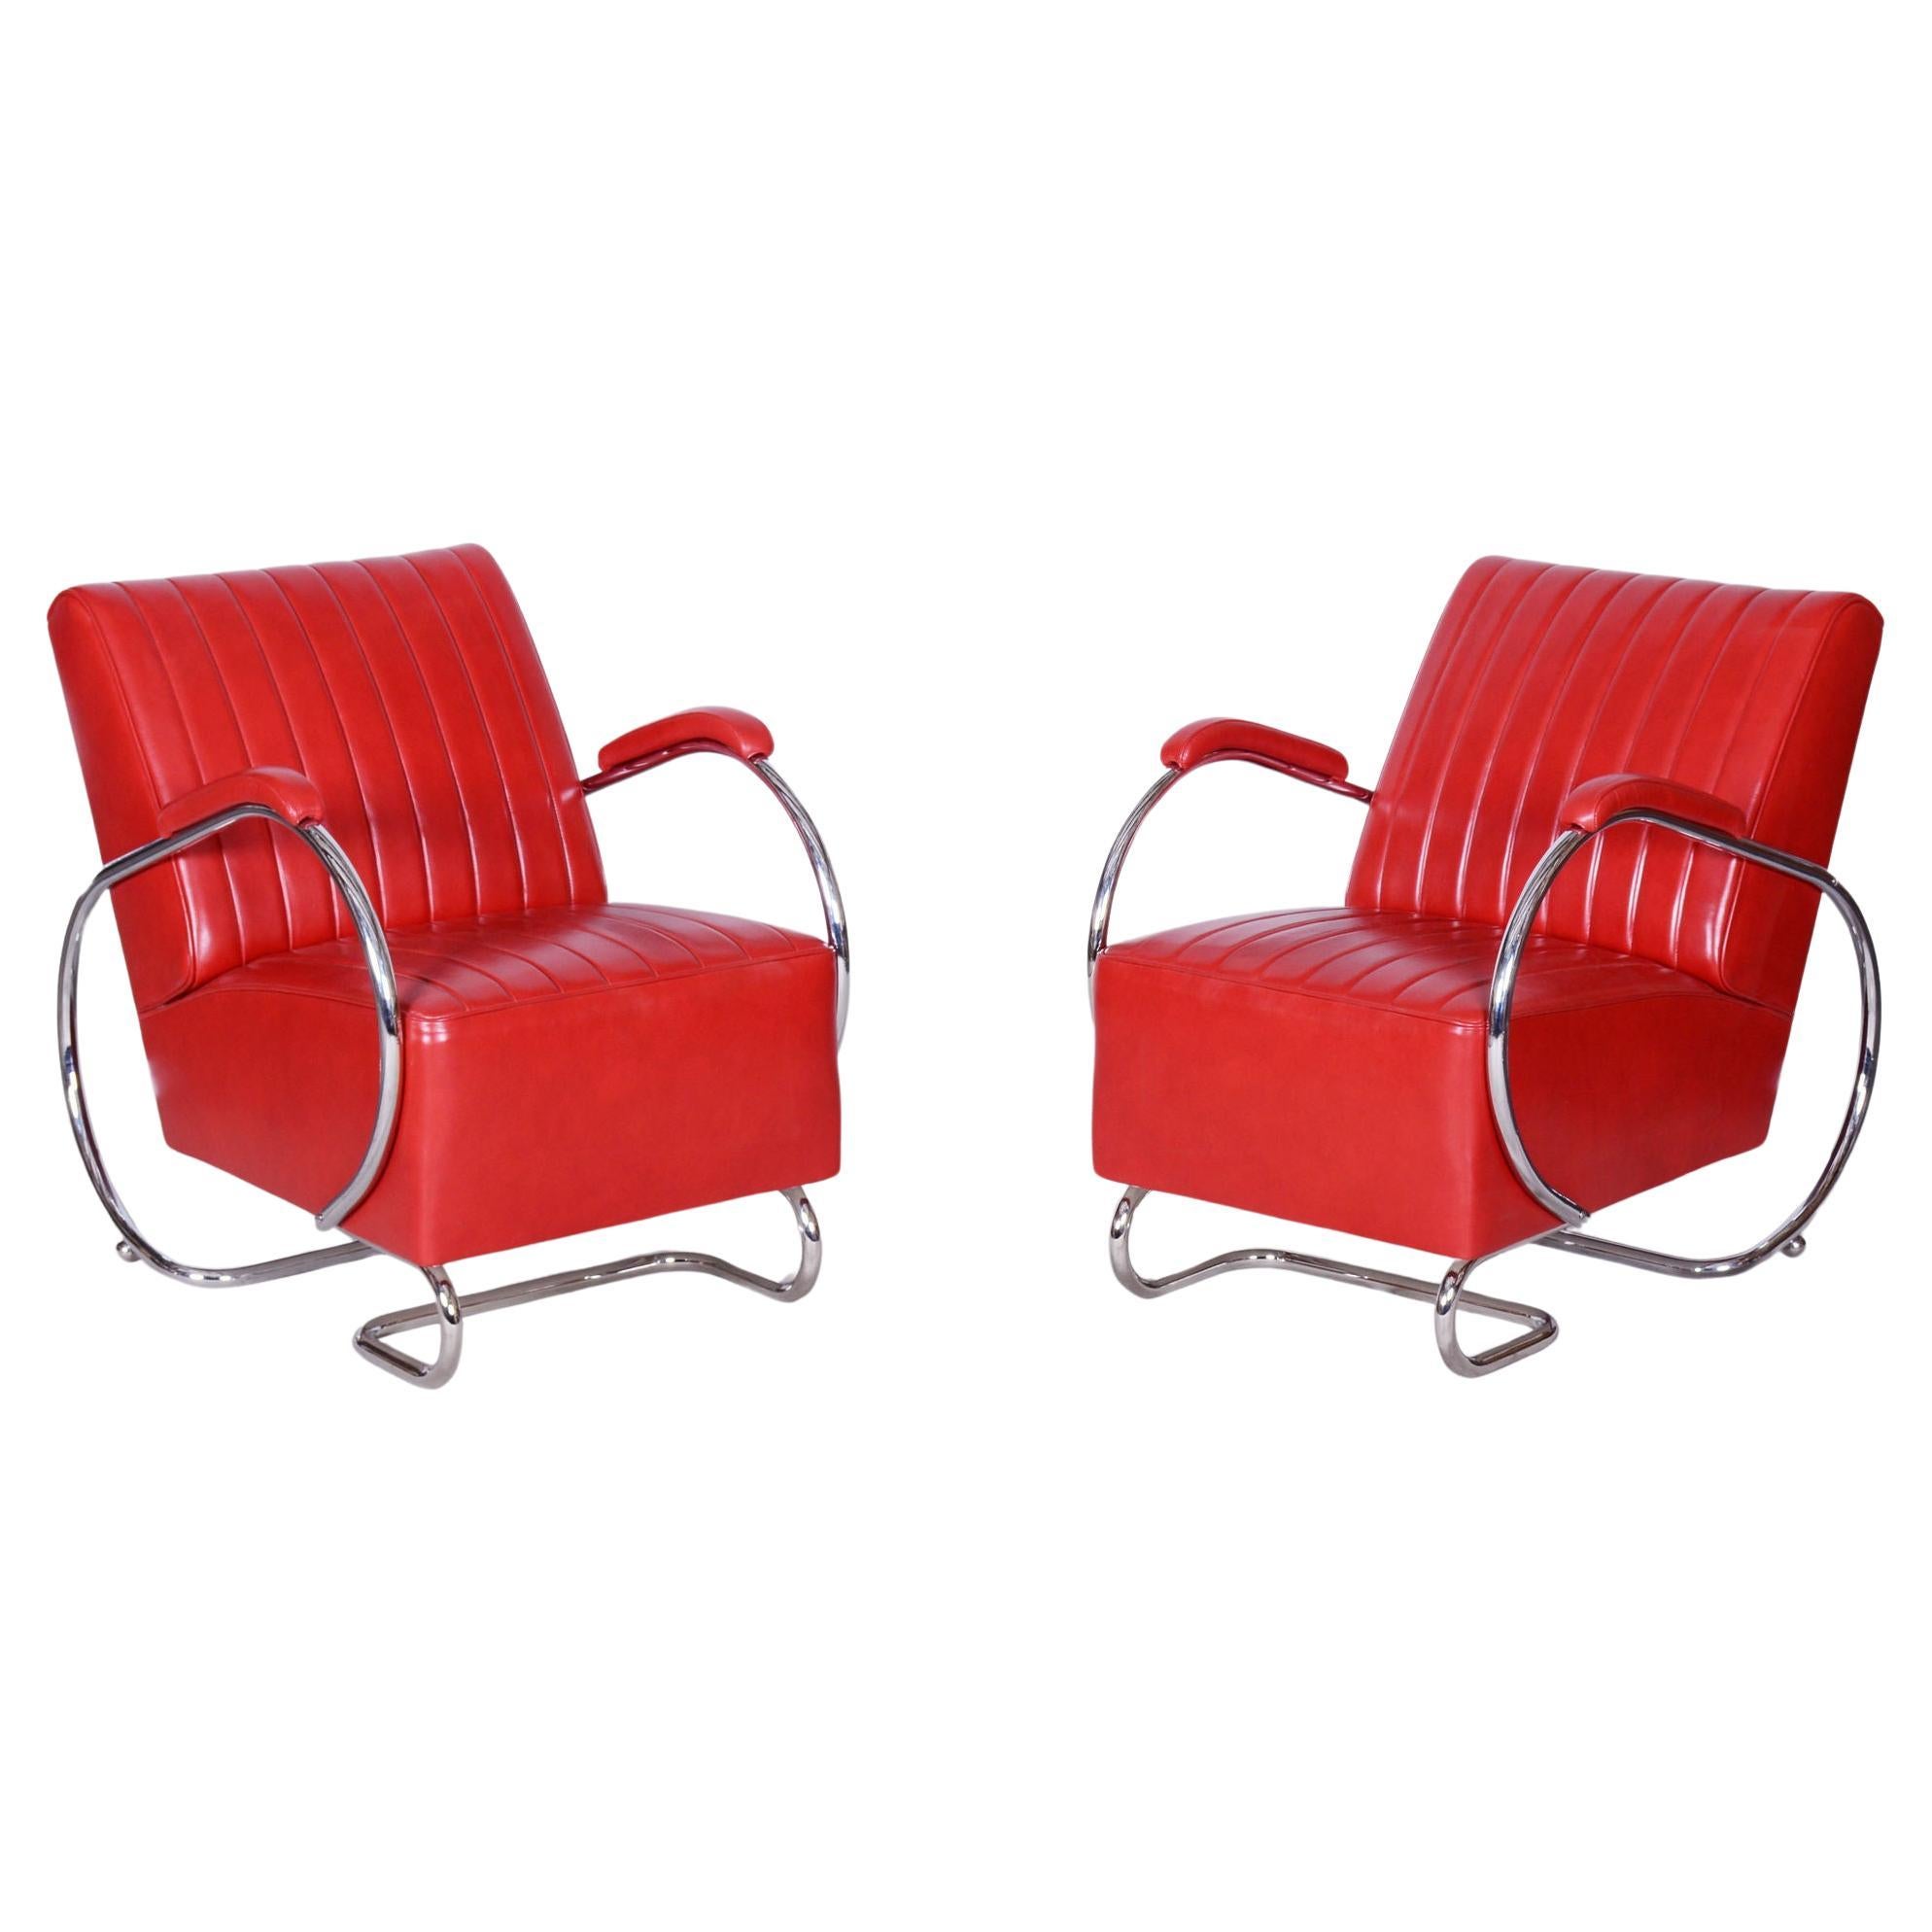 Restored Bauhaus Pair of Armchairs, by Hynek Gottwald, Leather, Czech, 1930s For Sale